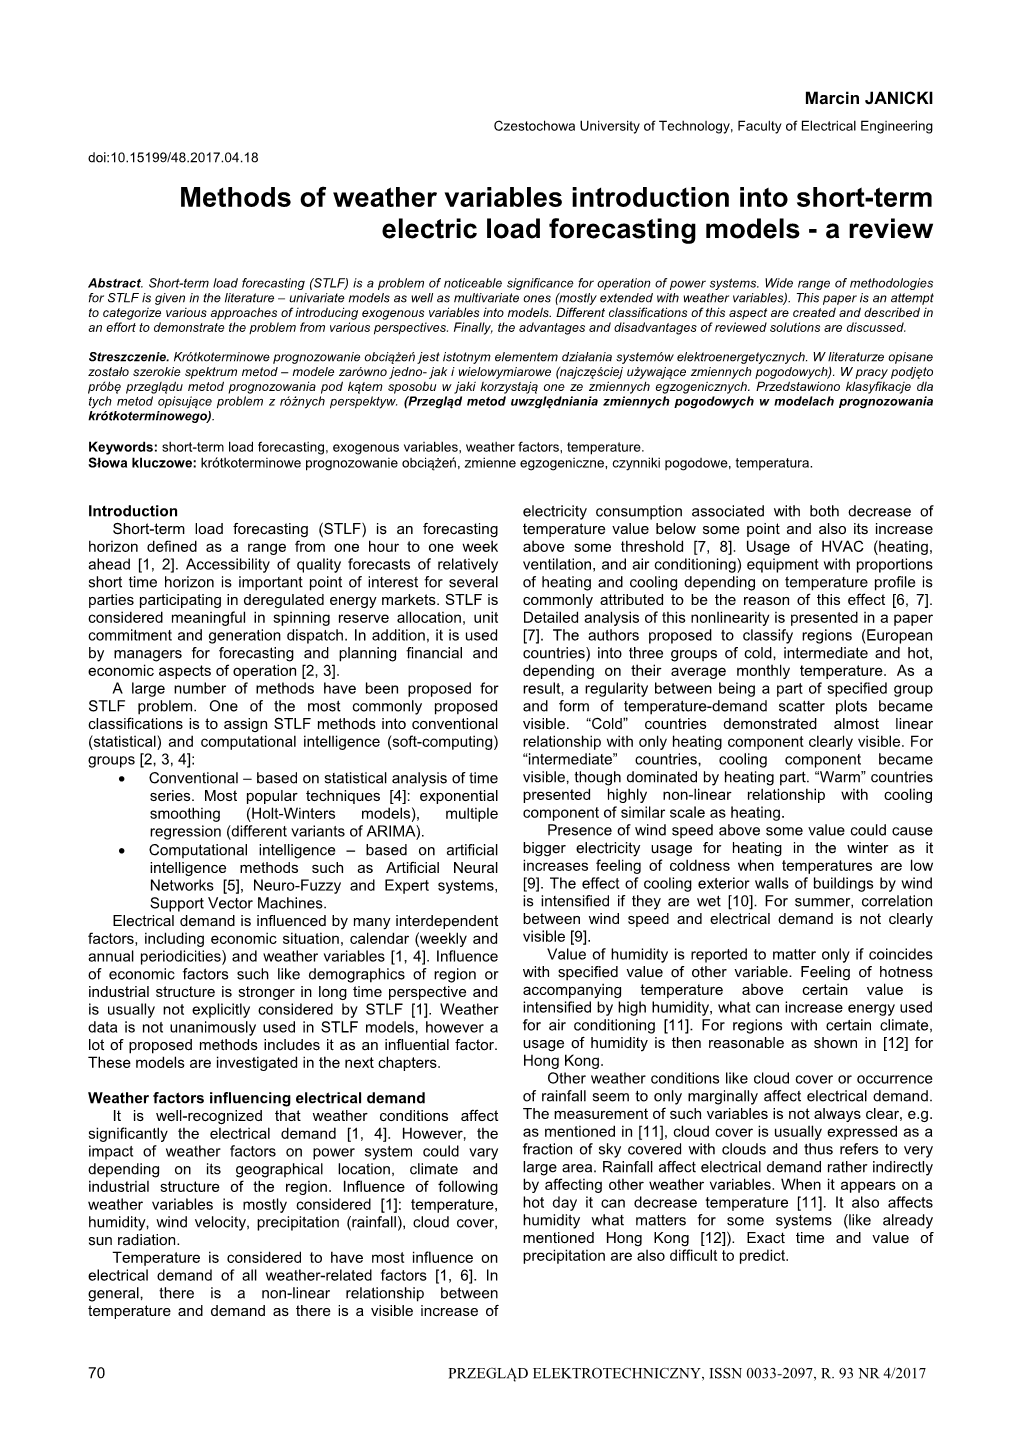 Methods of Weather Variables Introduction Into Short-Term Electric Load Forecasting Models - a Review